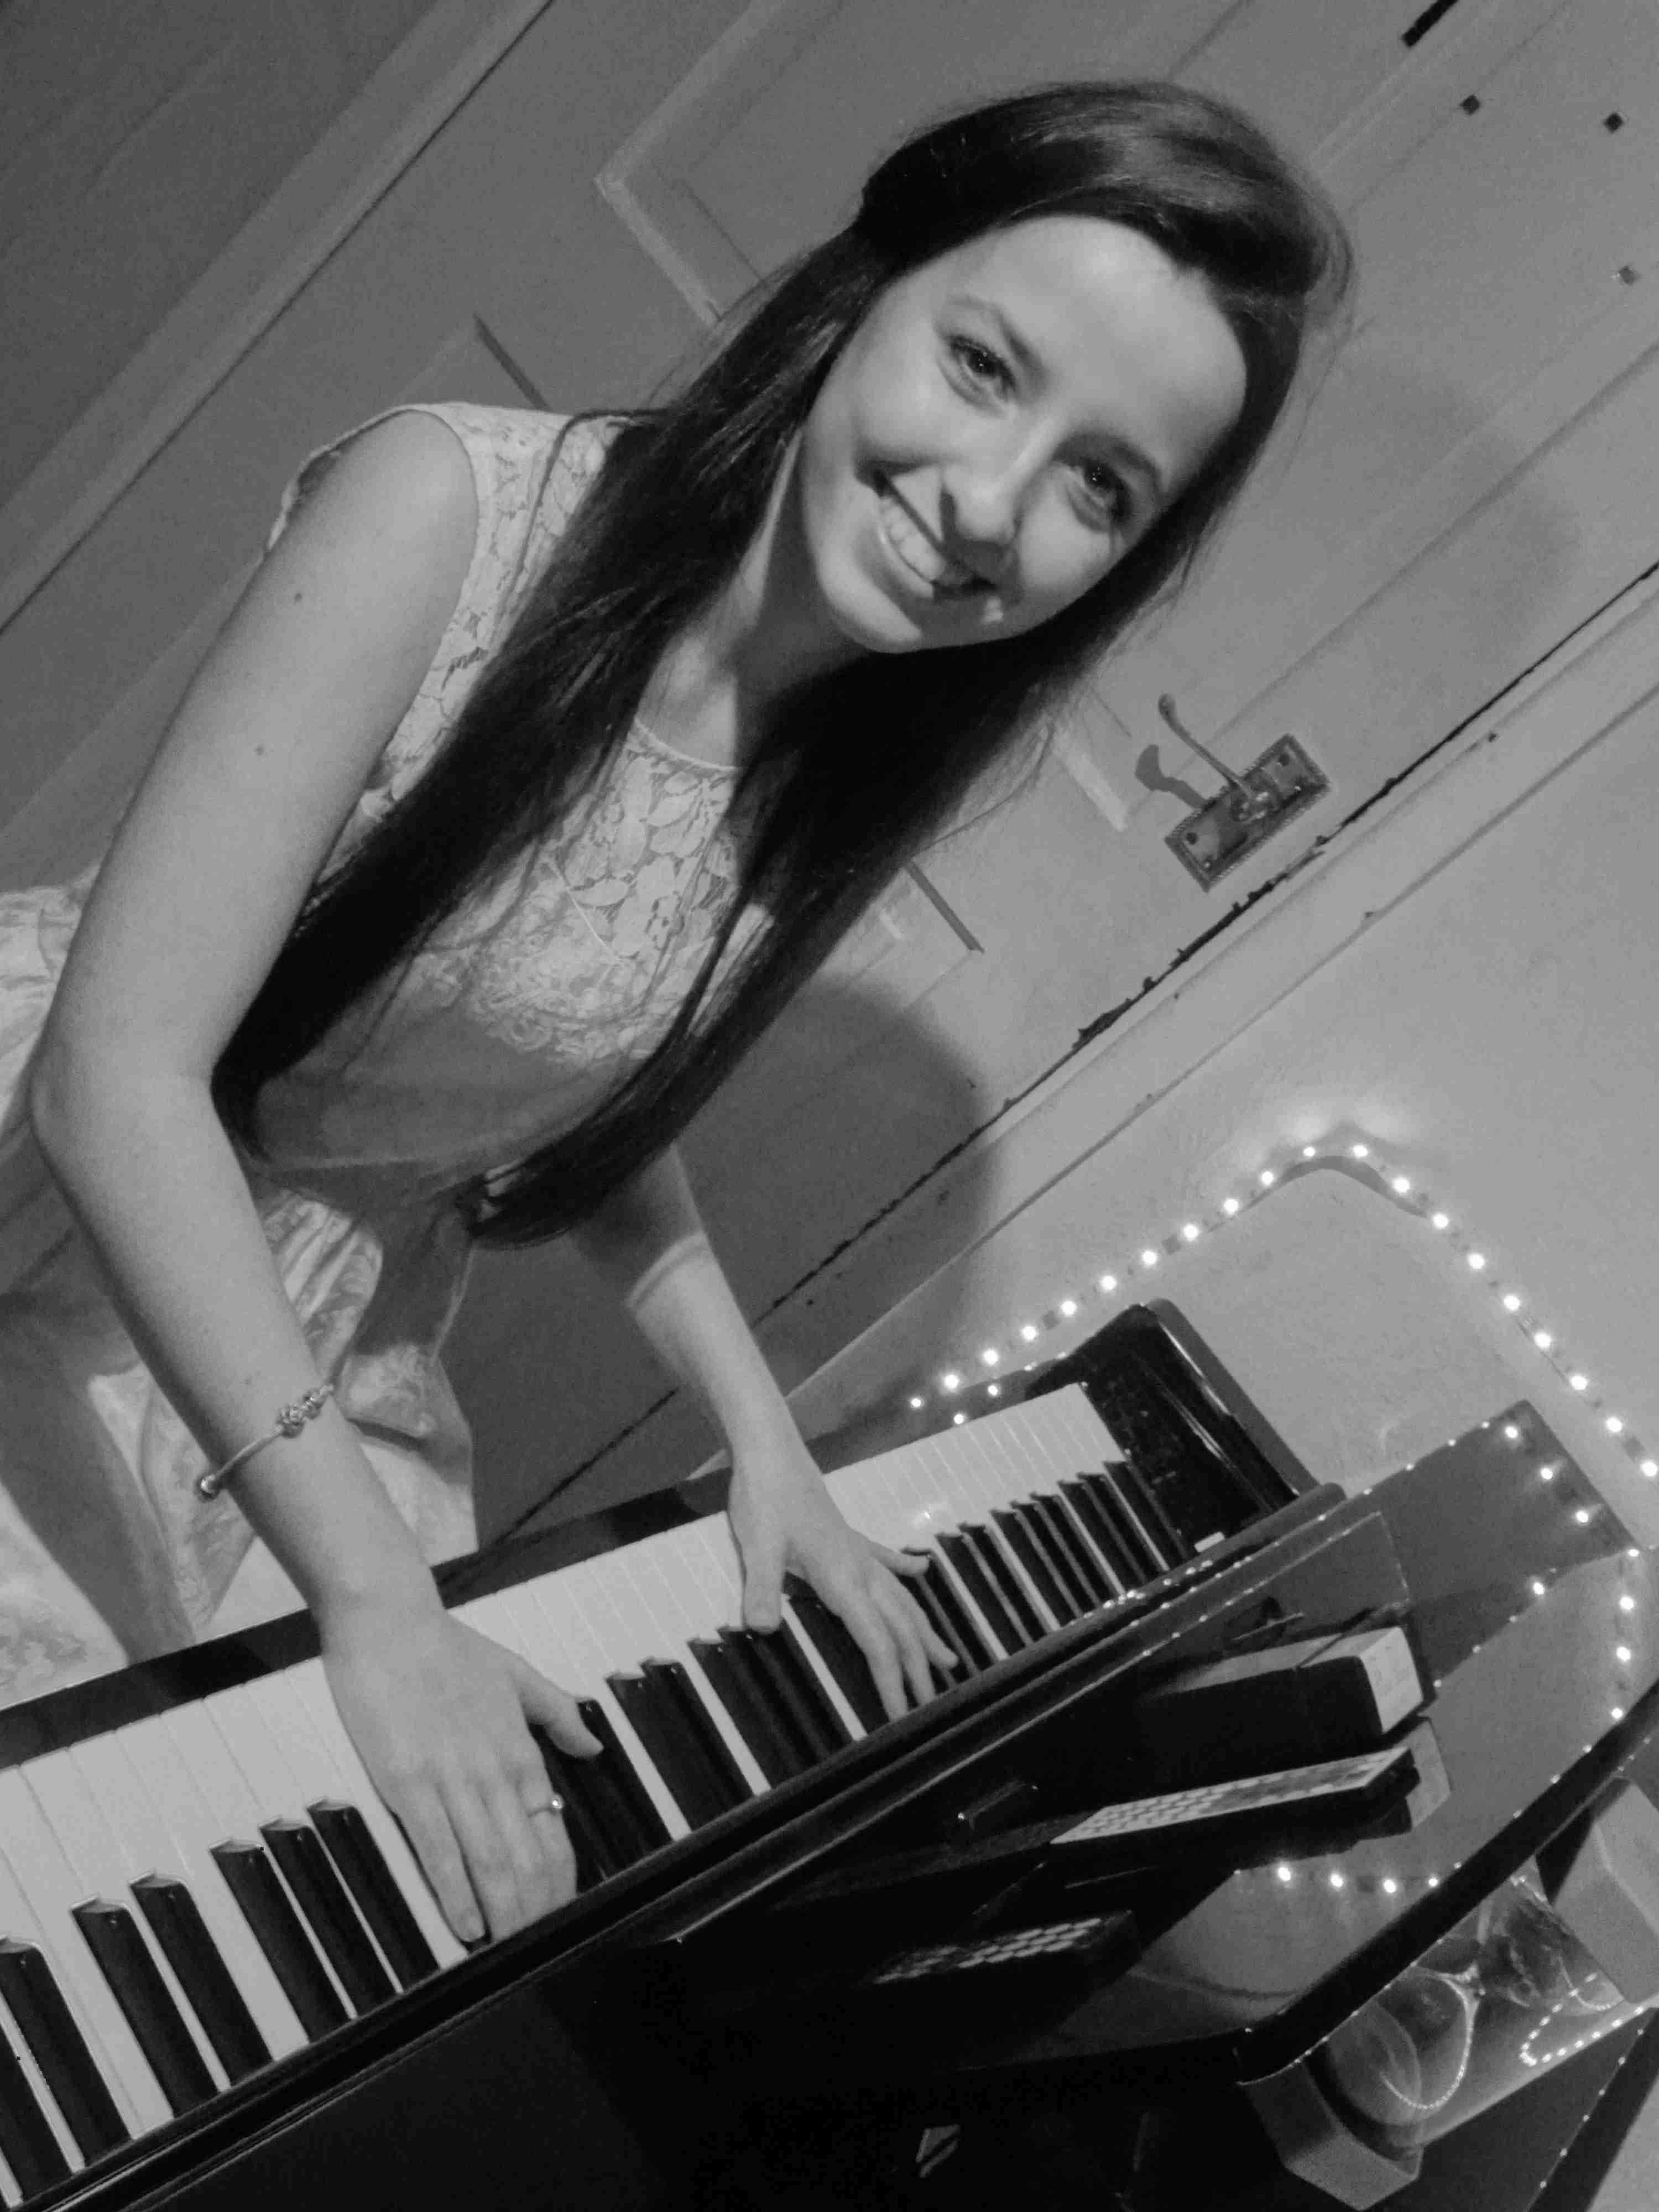 Up-and-coming singer/pianist brings her talent to The Brindley 🗓